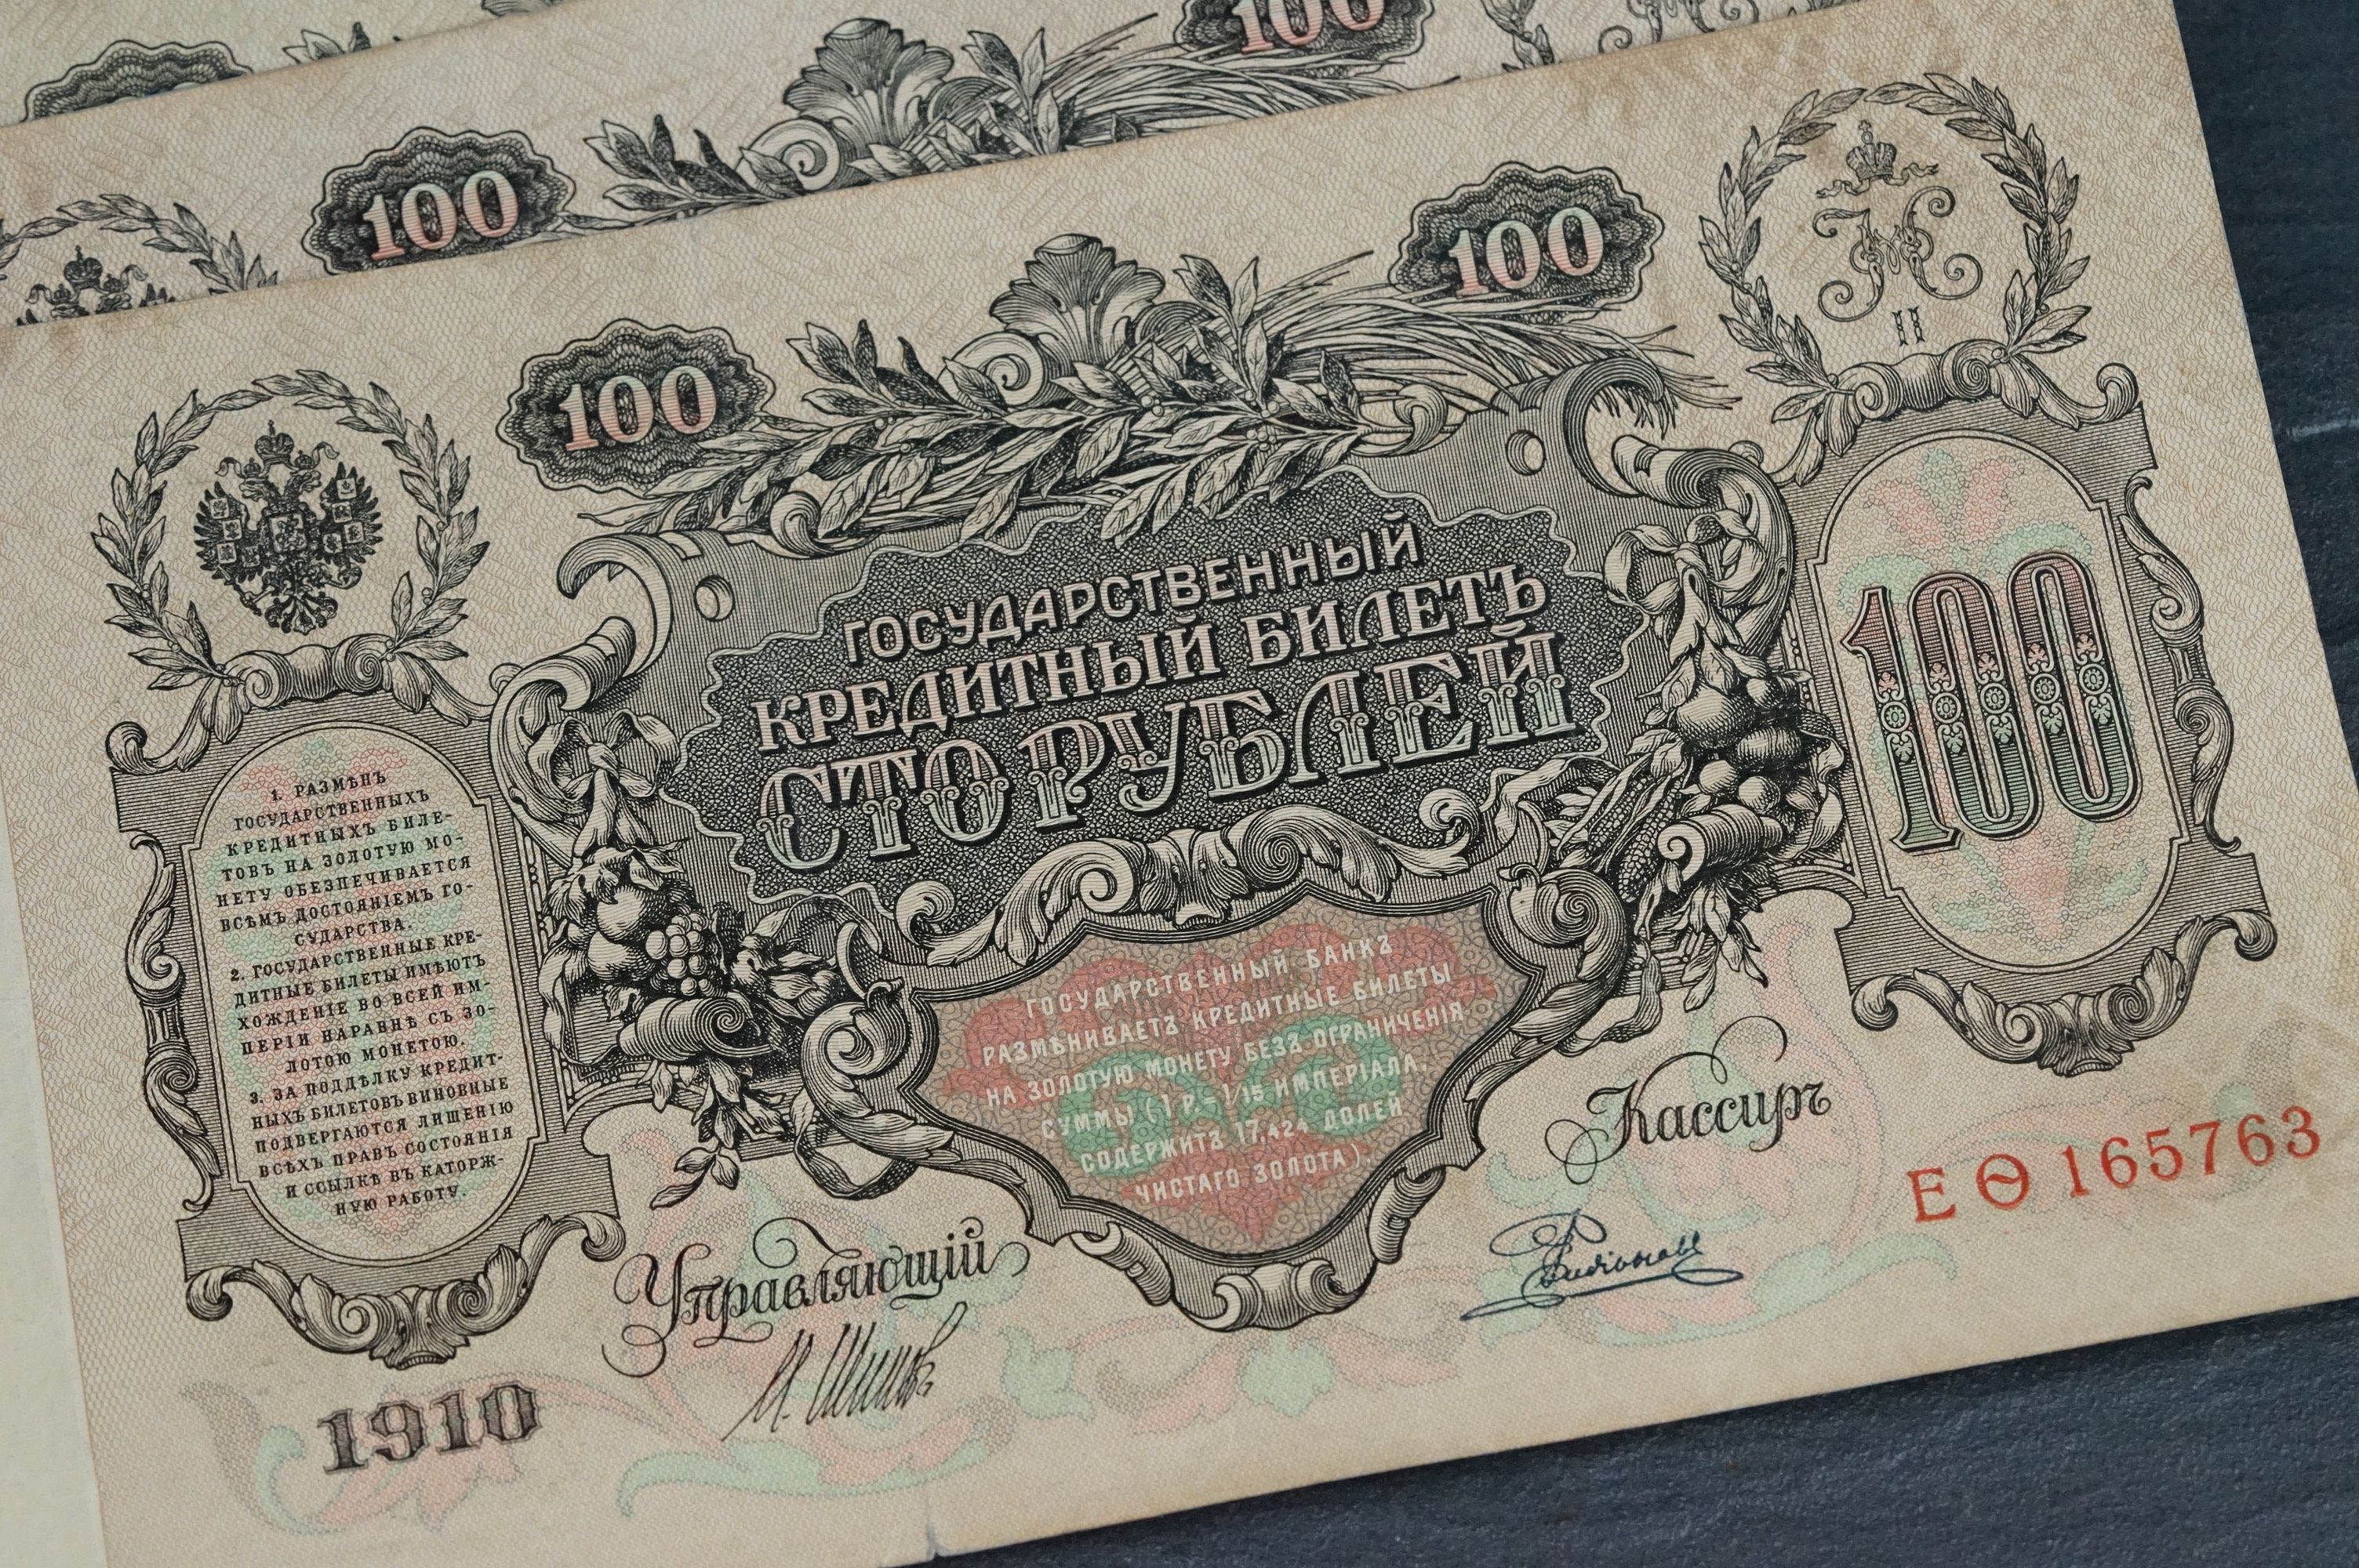 A collection of Russian 100 Rouble banknotes dated 1910. - Image 3 of 6